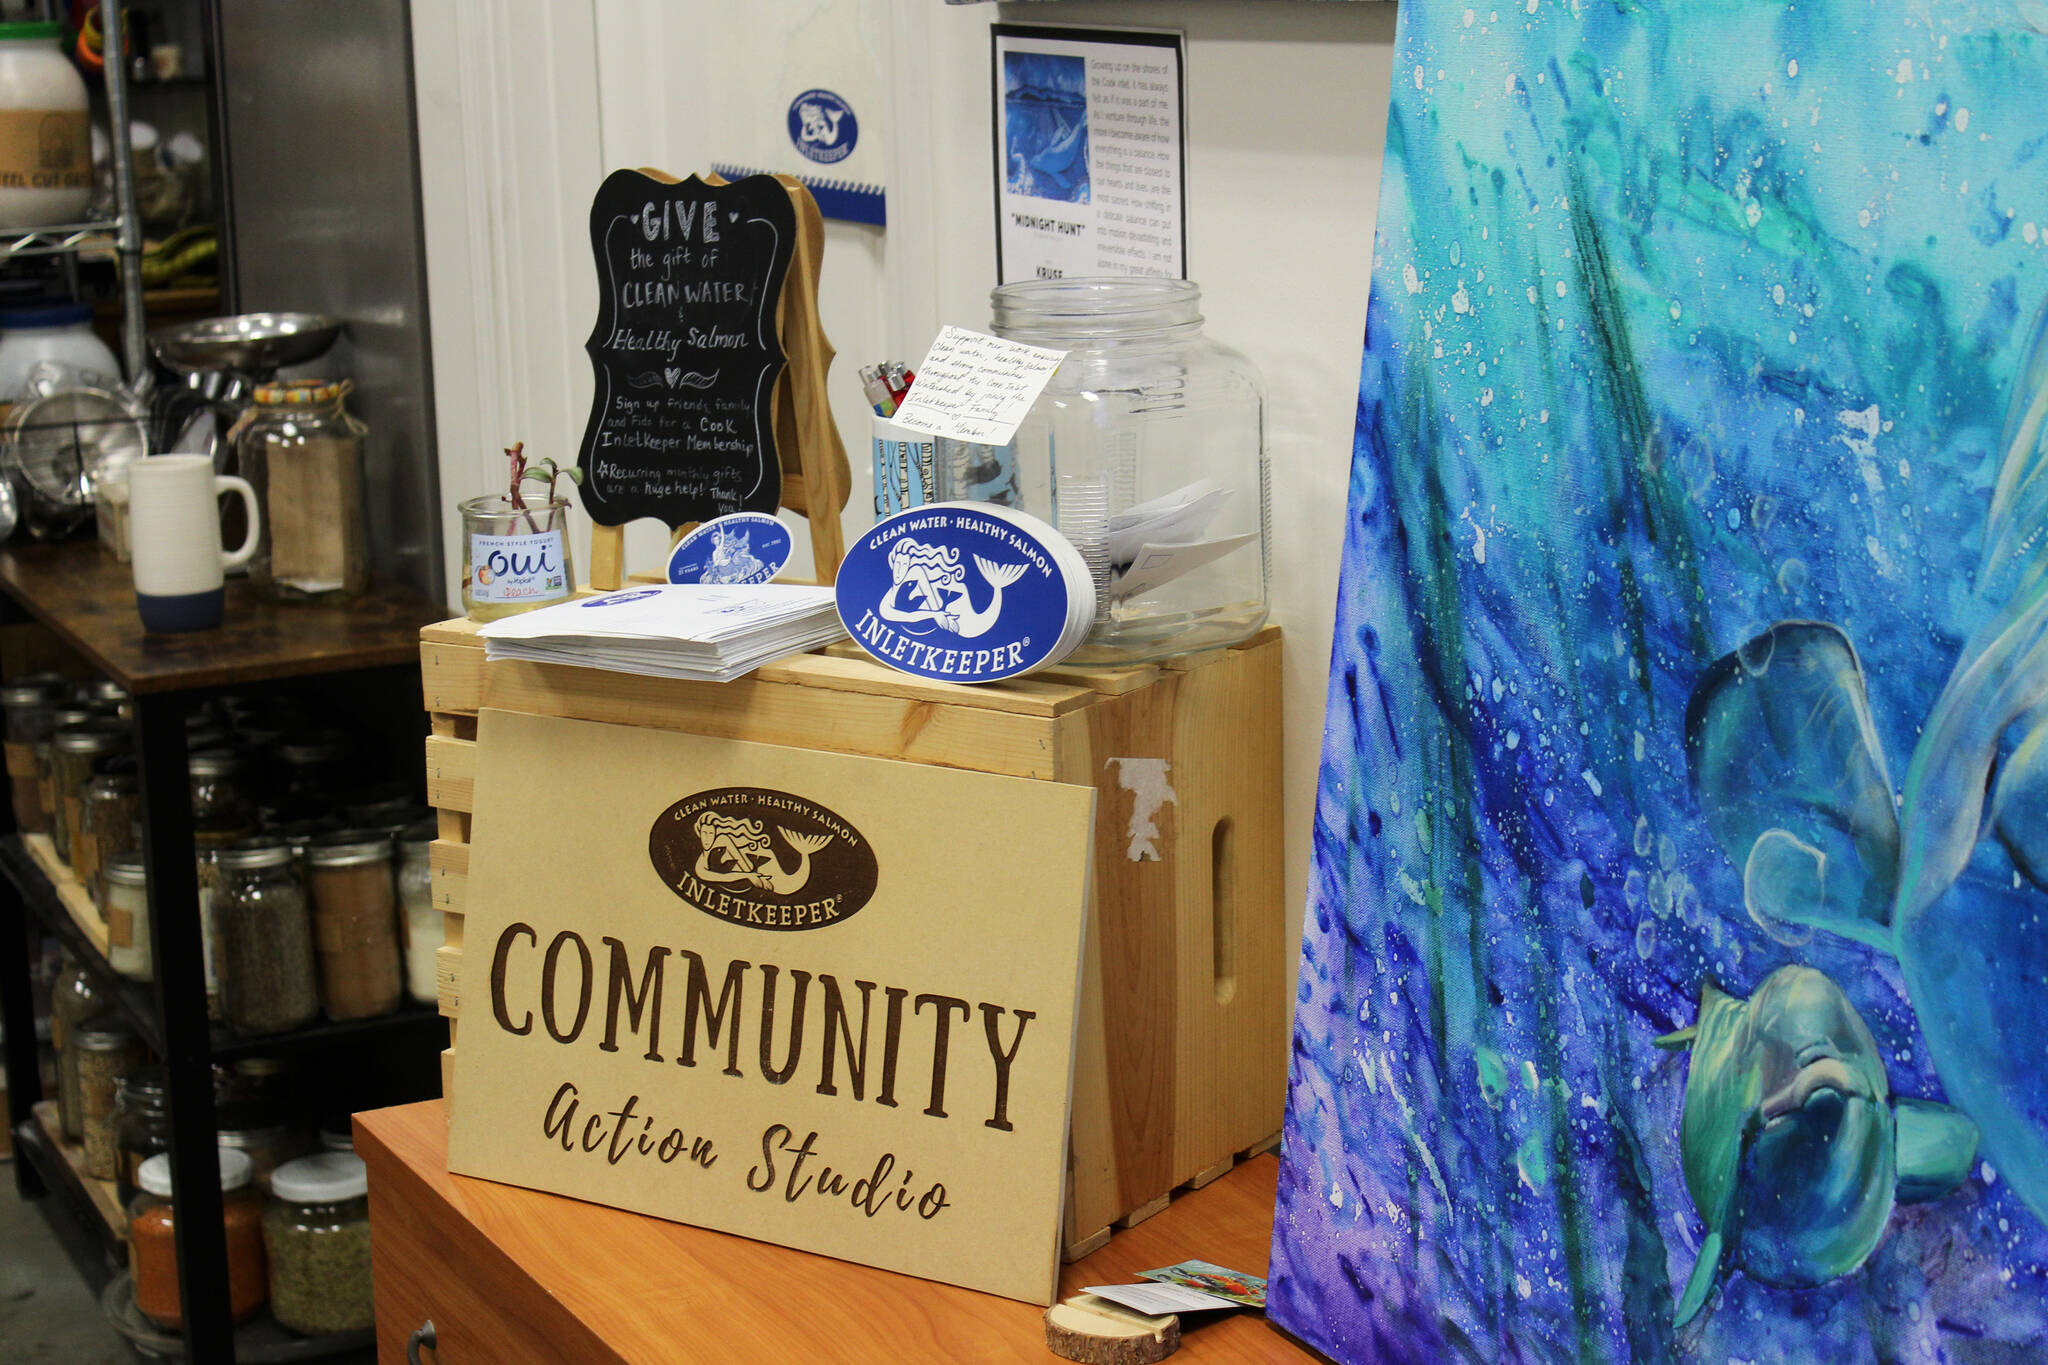 Informatin about Cook Inletkeeper is displayed next to artwork for sale as part of the "ART Sale 258" at the Cook Inletkeeper Community Action Studio on Thursday, Dec. 9, 2021 in Soldotna, Alaska. (Ashlyn O’Hara/Peninsula Clarion)